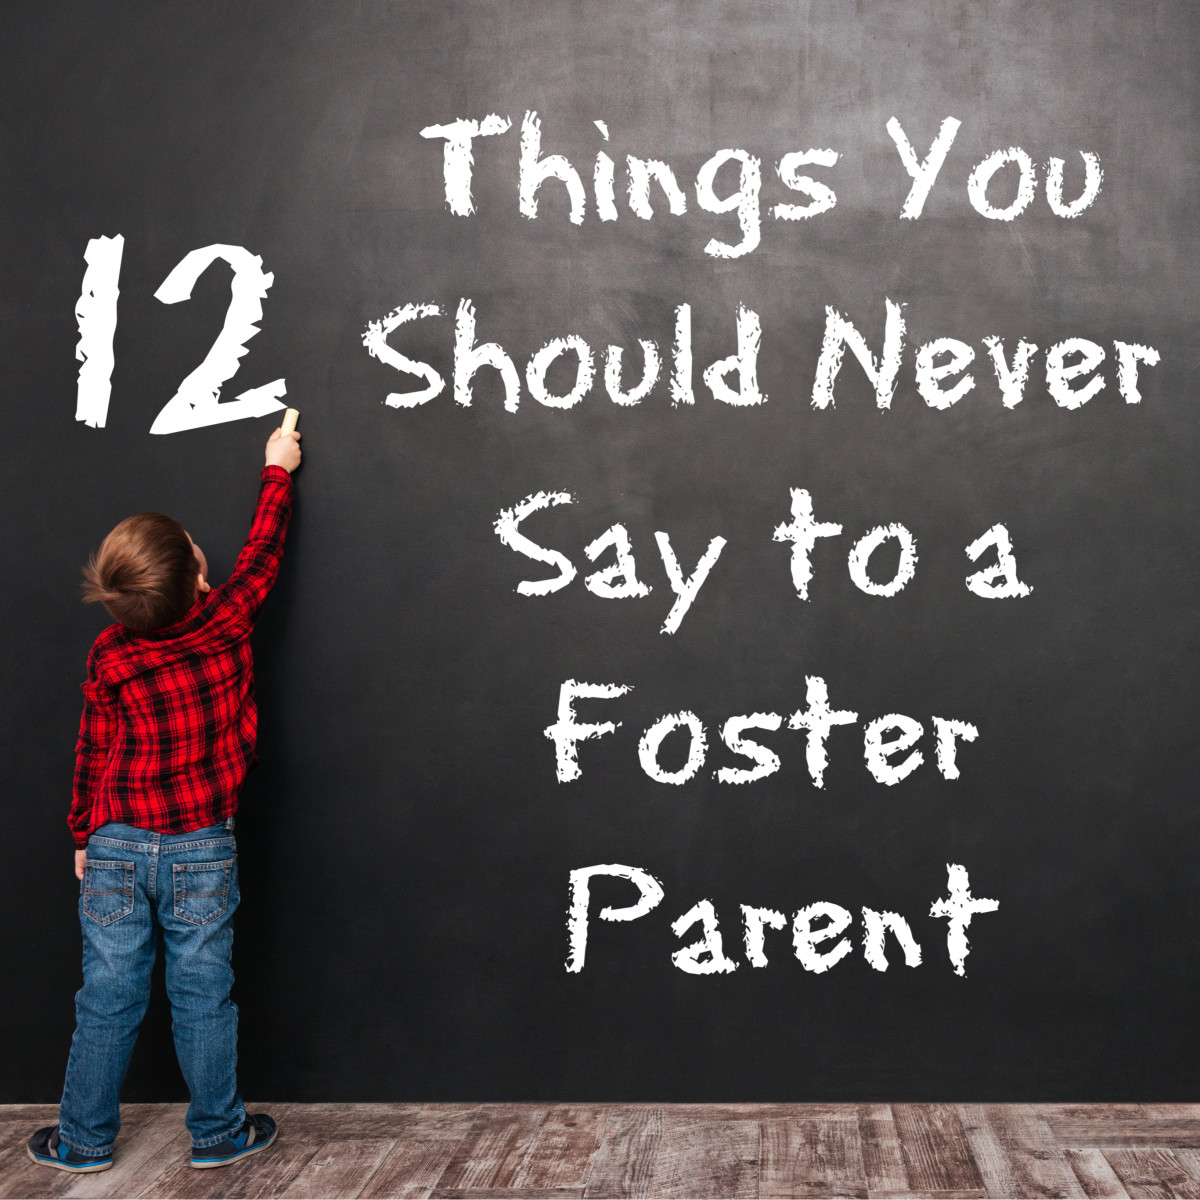 12 Things You Should Never Say to a Foster Parent